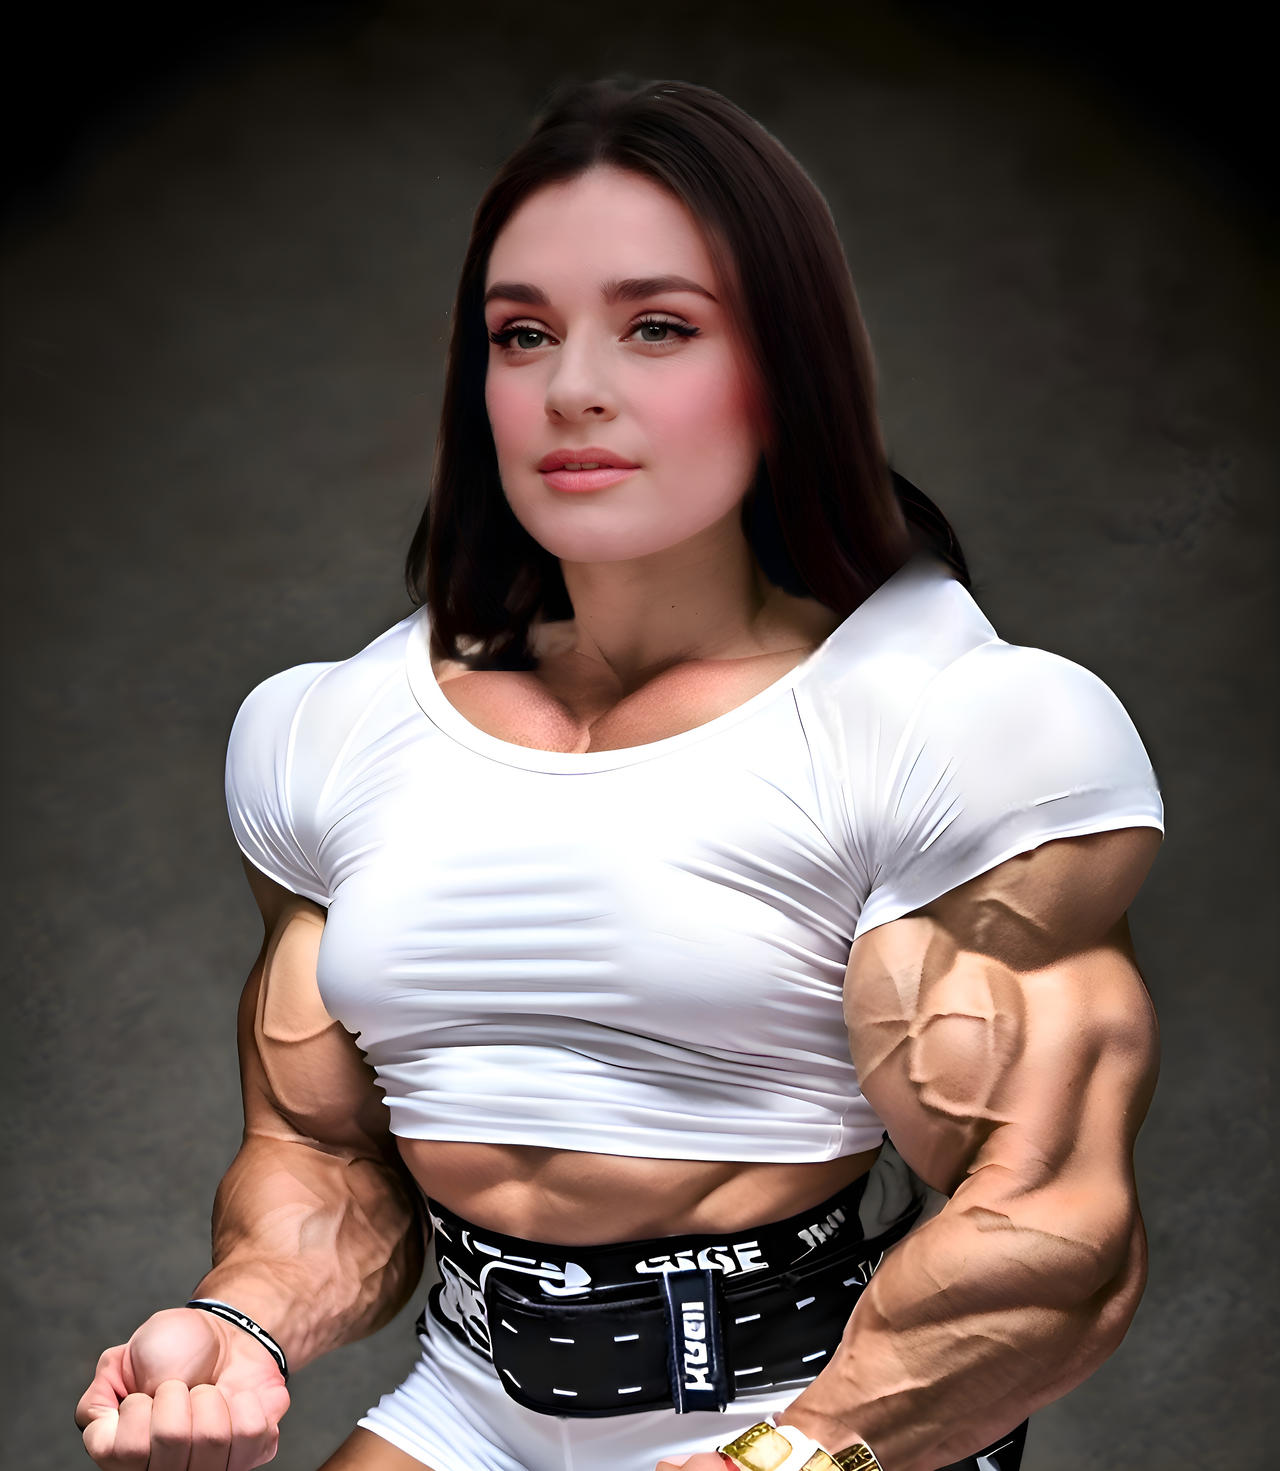 Paige Bulked Up by gluon124 on DeviantArt